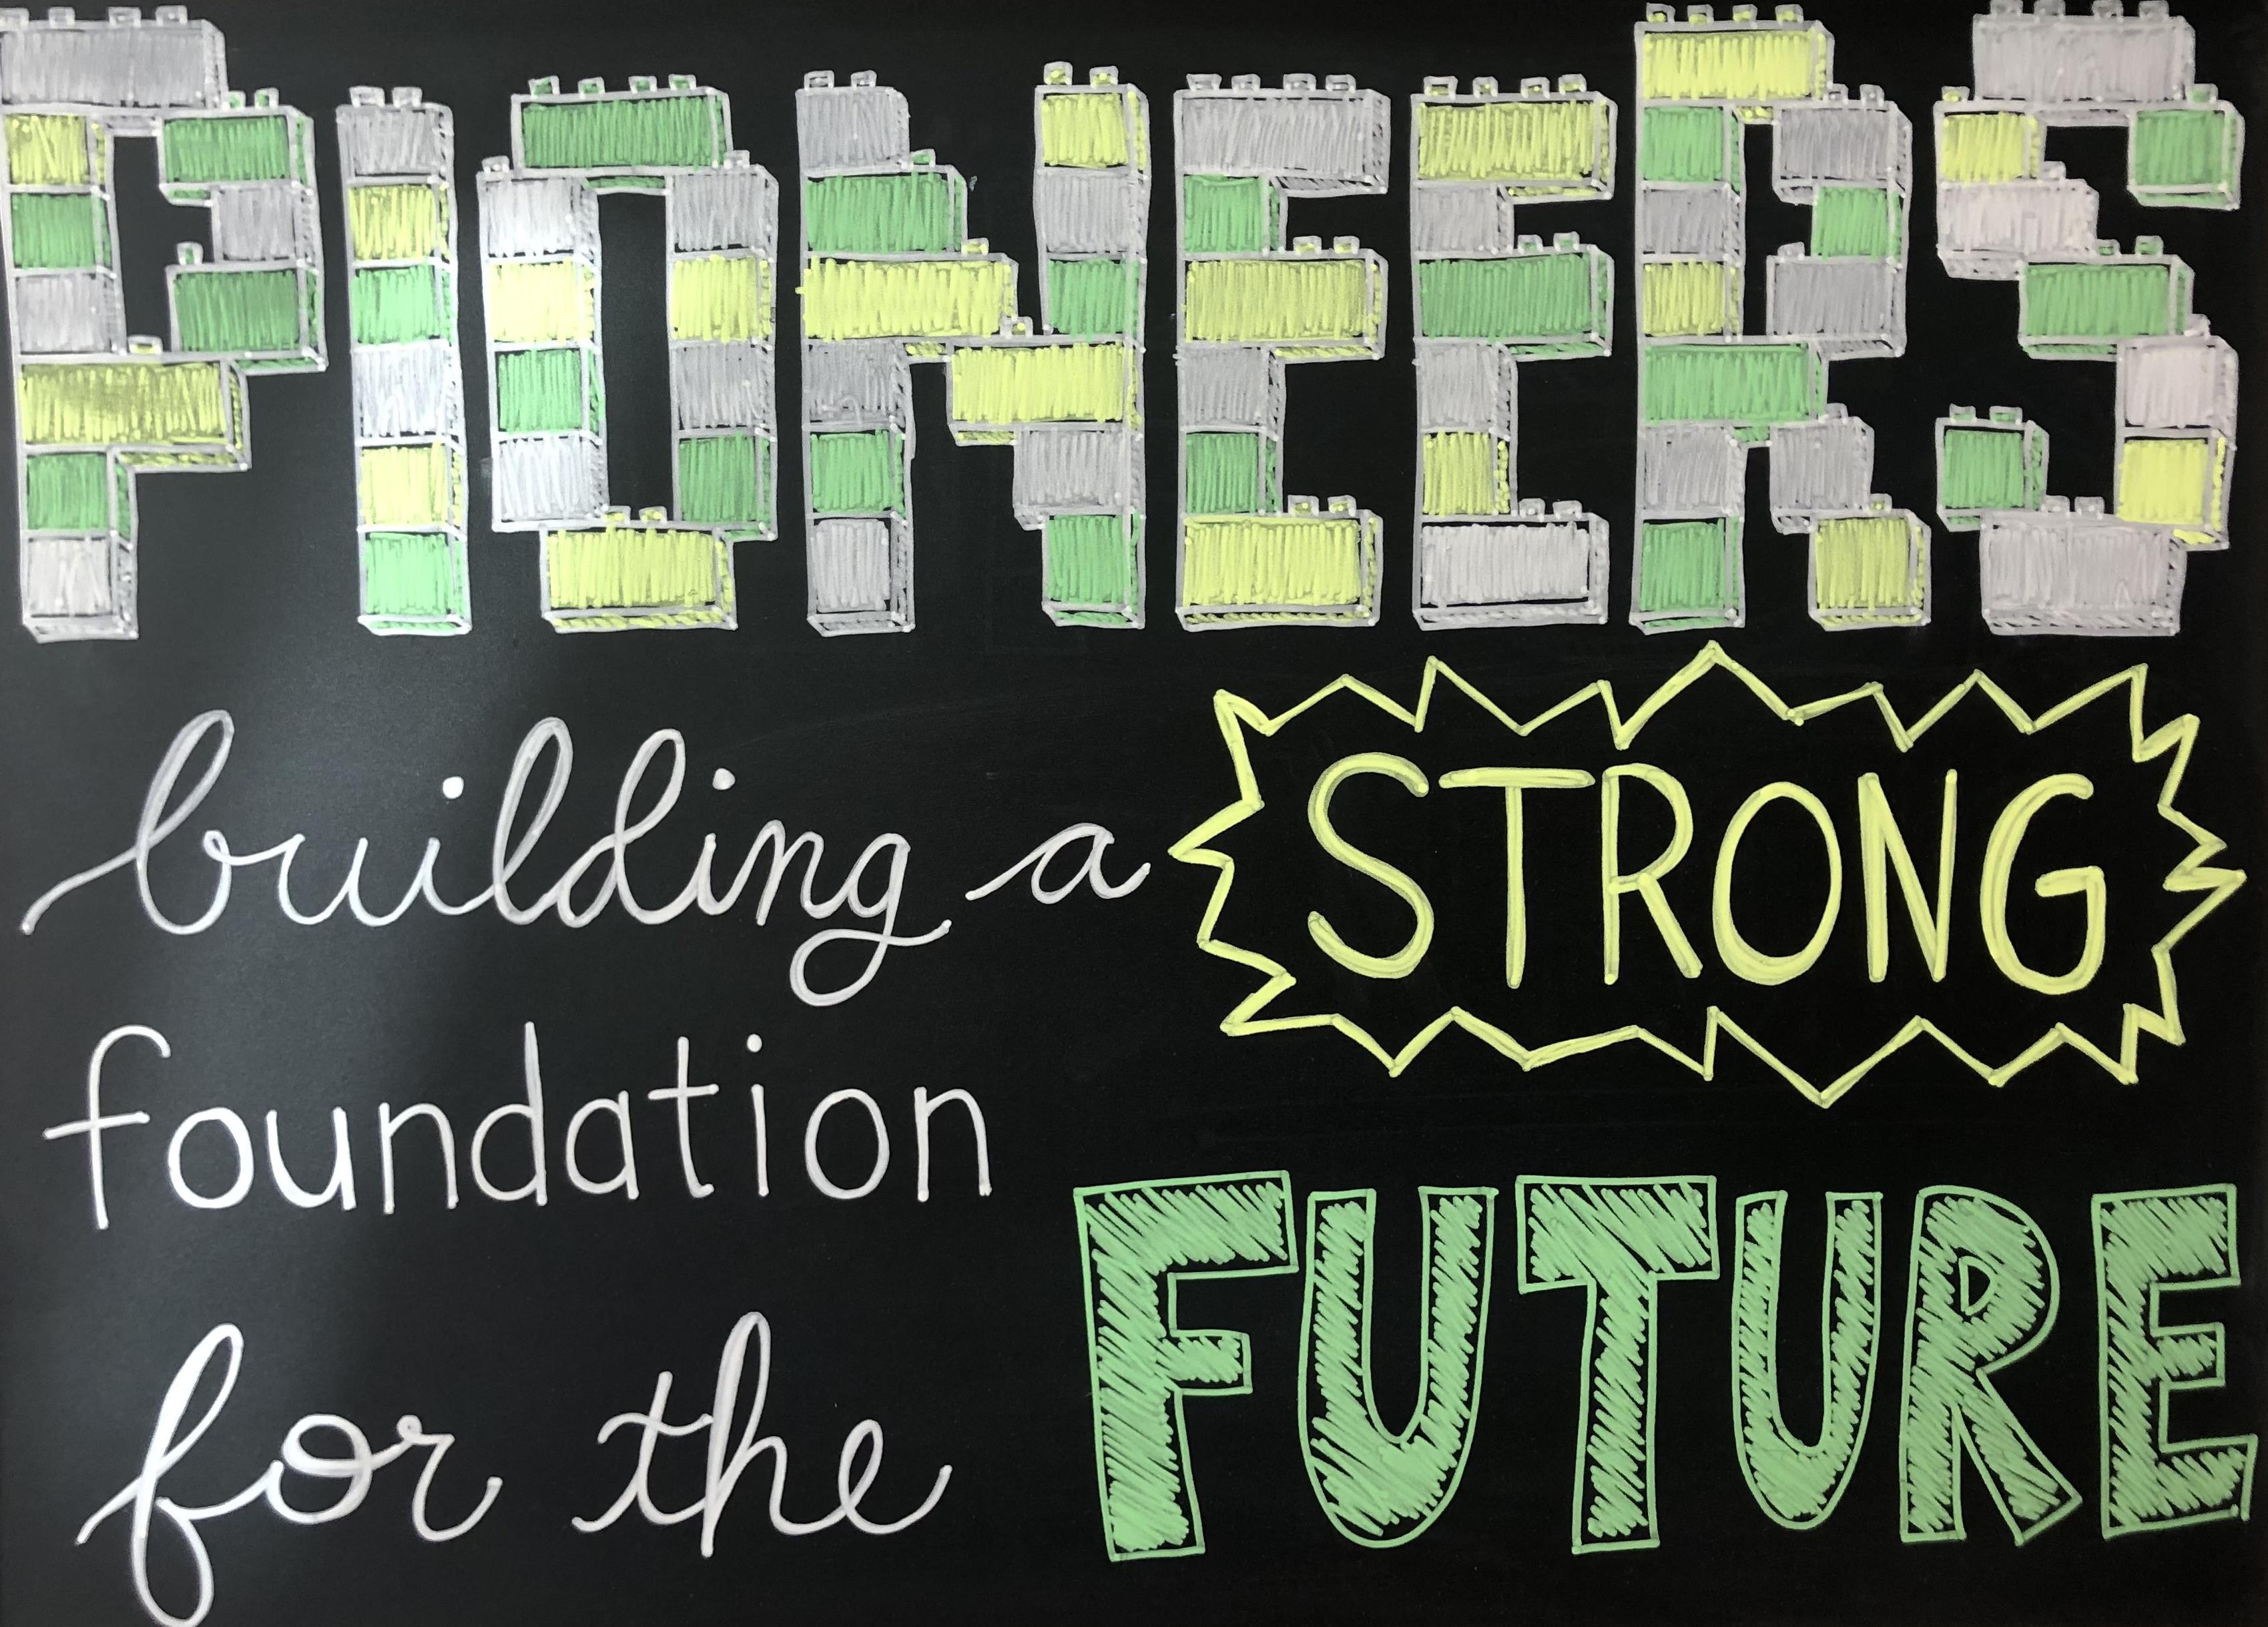 Pioneers Building a strong foundation for the future